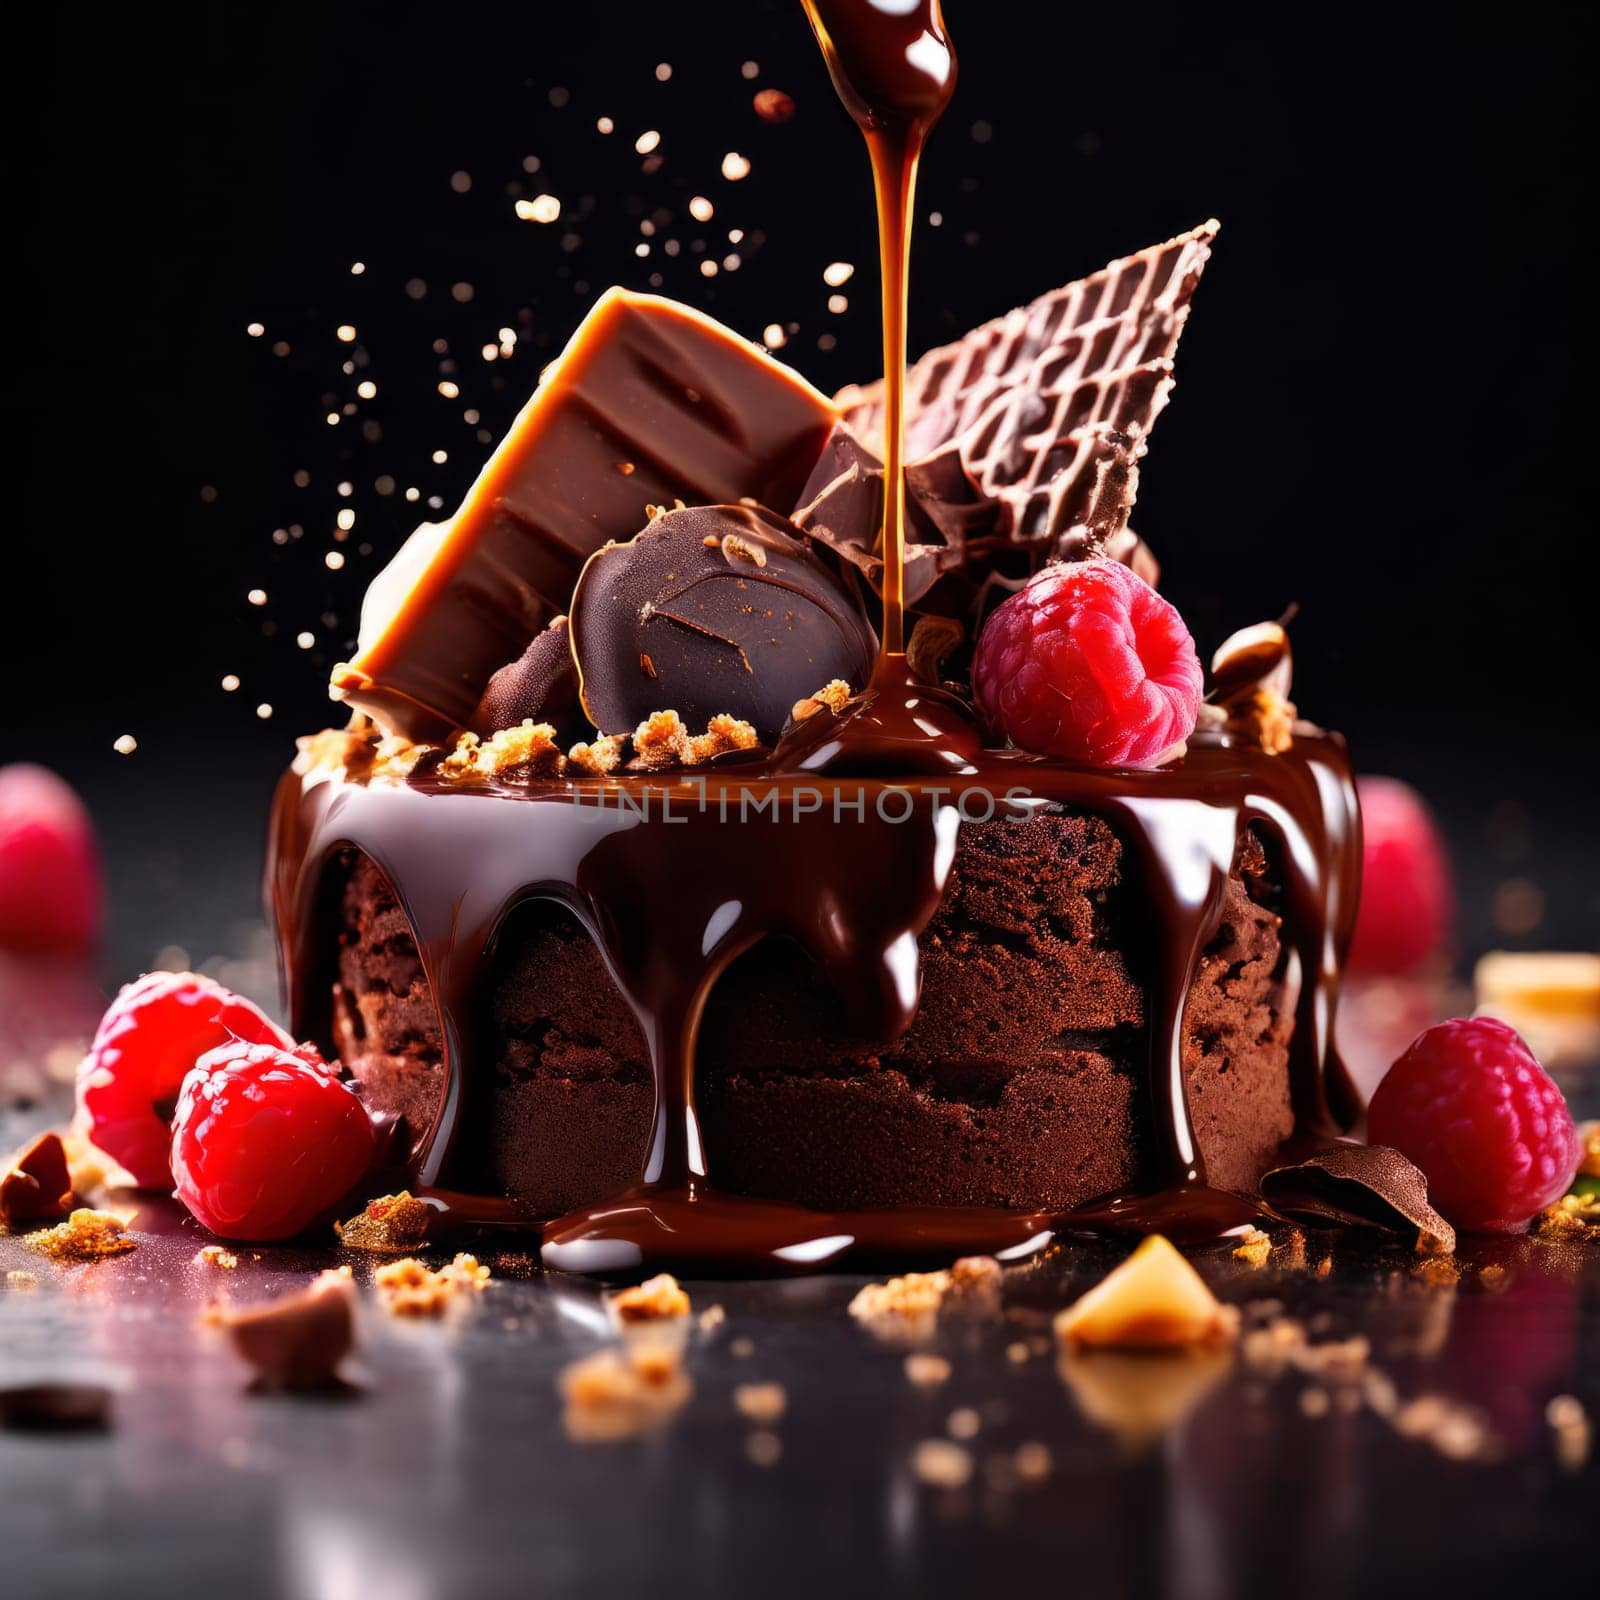 Decadent chocolate cake adorned with fresh raspberries, drizzled with rich chocolate sauce, perfect combination of sweet, tart flavors. For advertise cafe, patisserie, restaurant, food blog, cookbook. by Angelsmoon